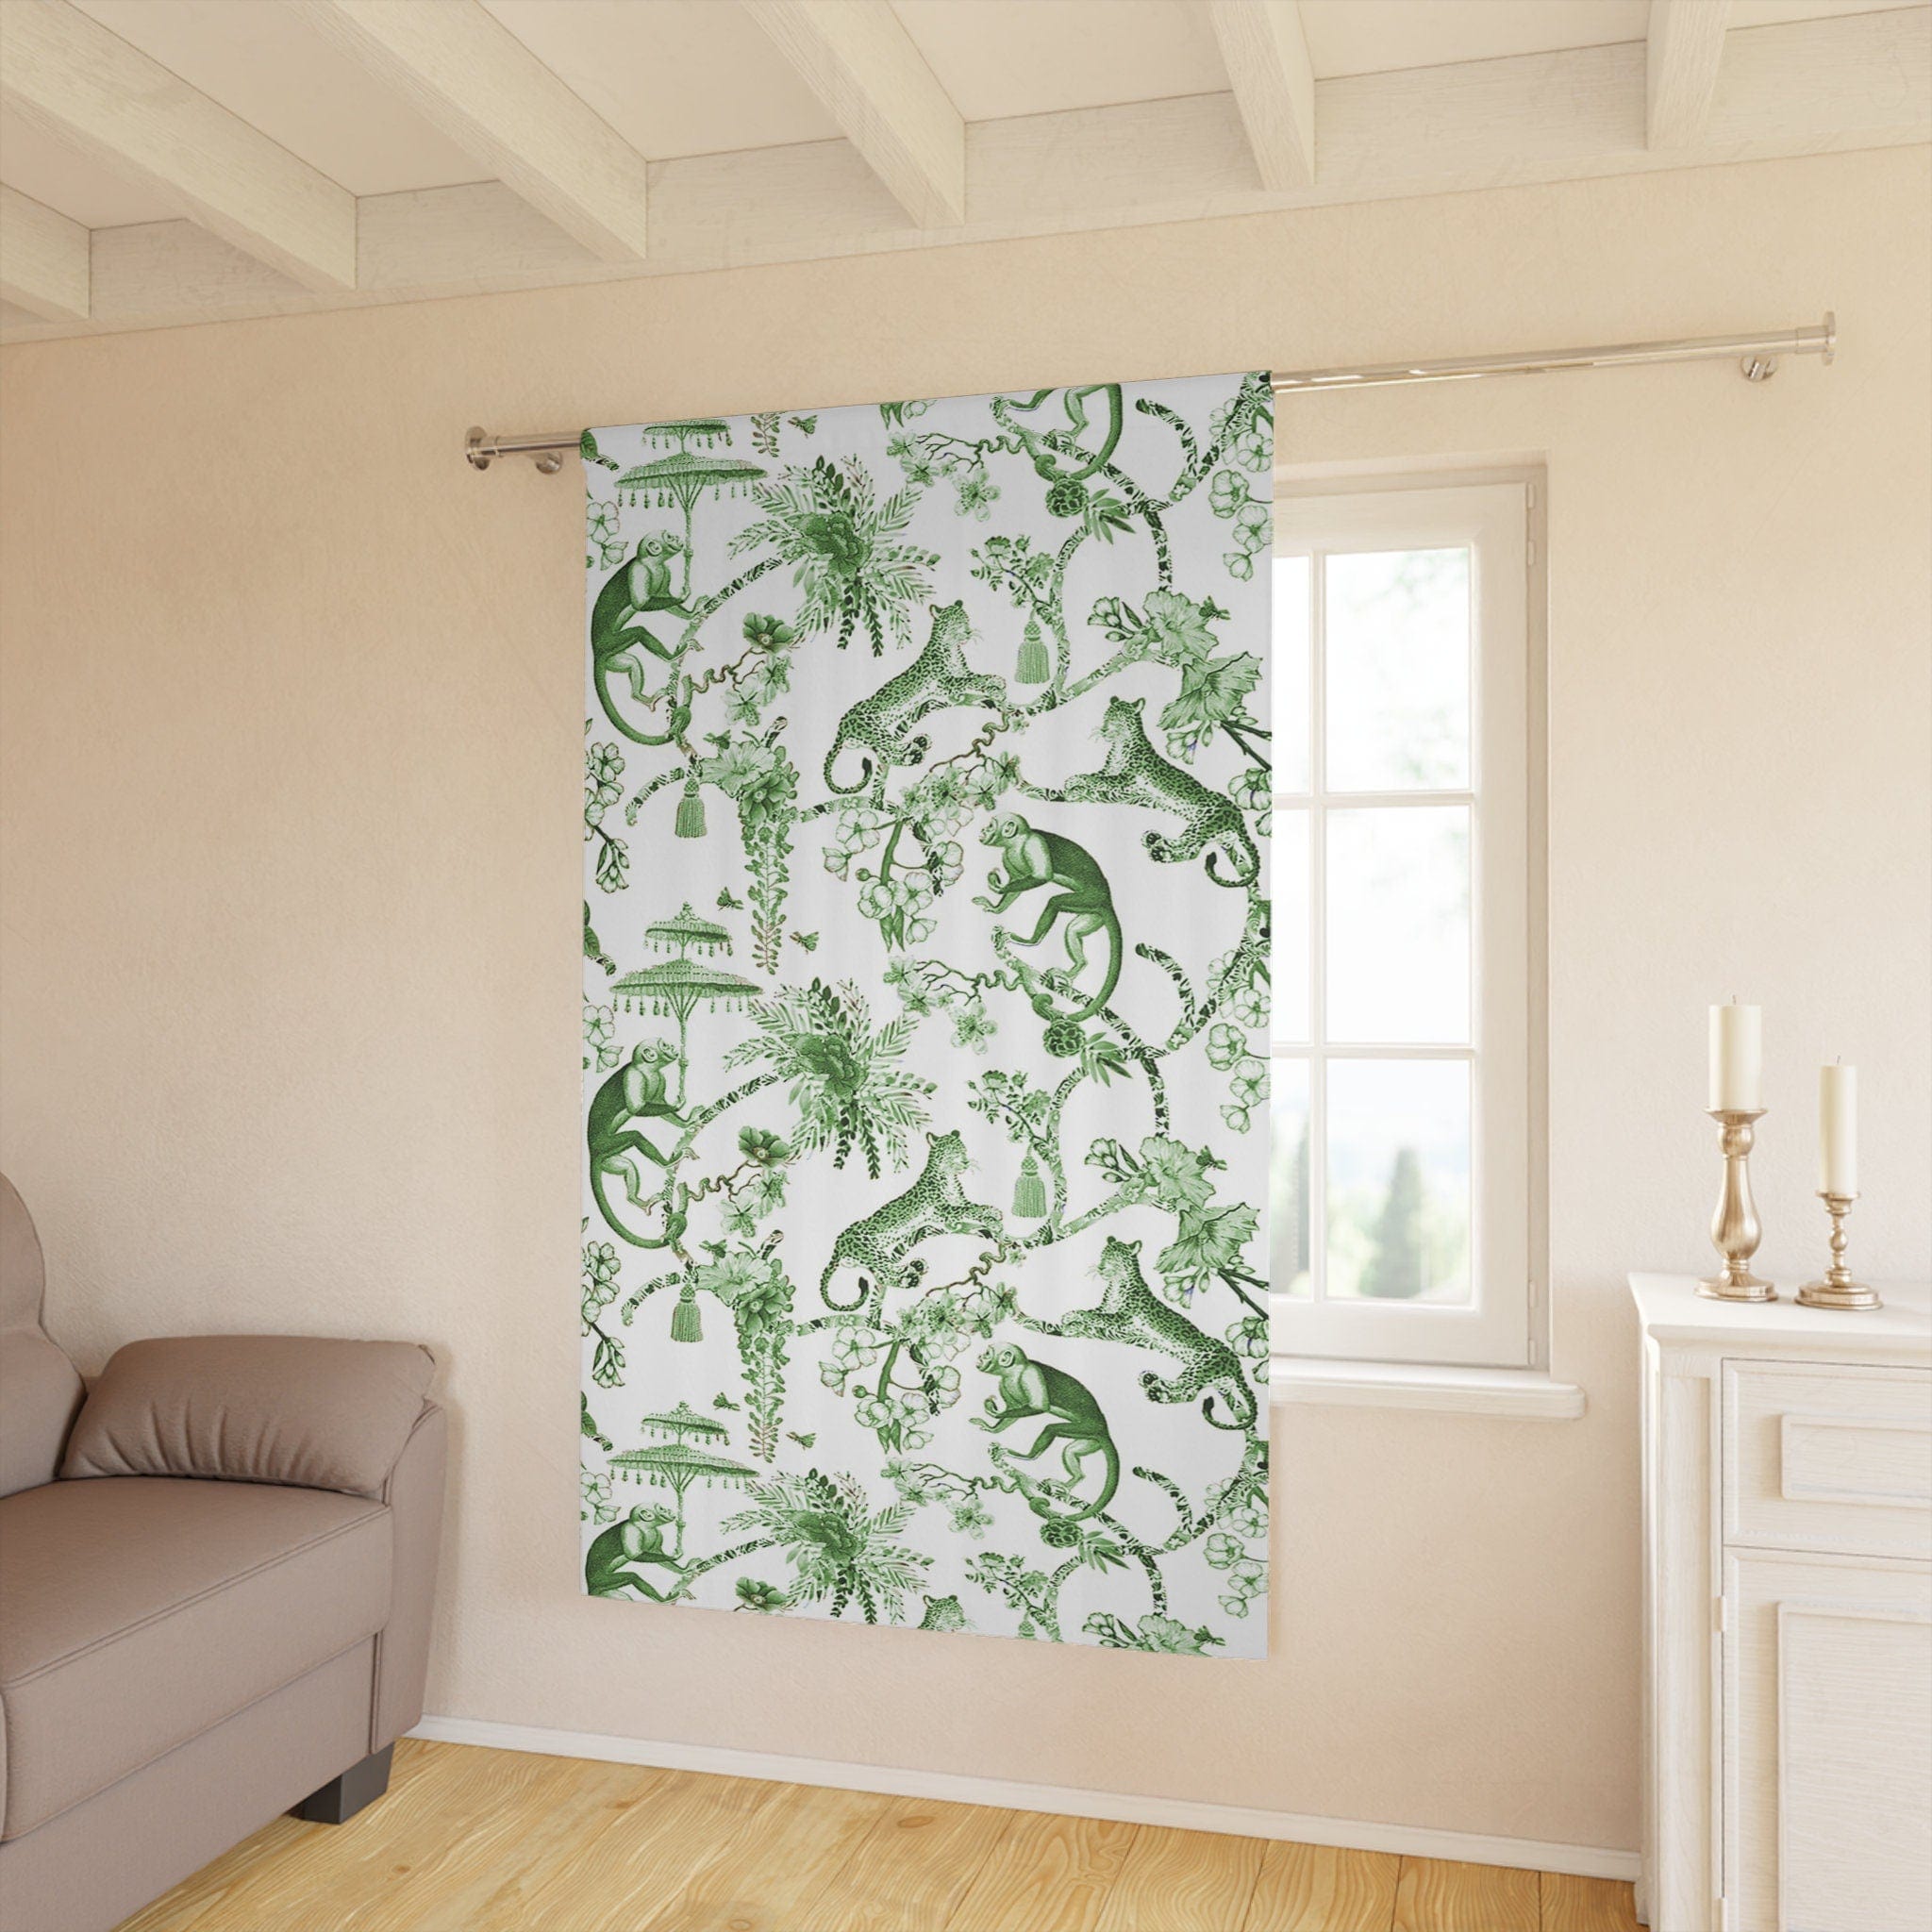 Chinoiserie Window Curtains, Floral Green and White Chinoiserie Jungle Curtain Panels, Botanical Toile Chinoiserie Window Treatment